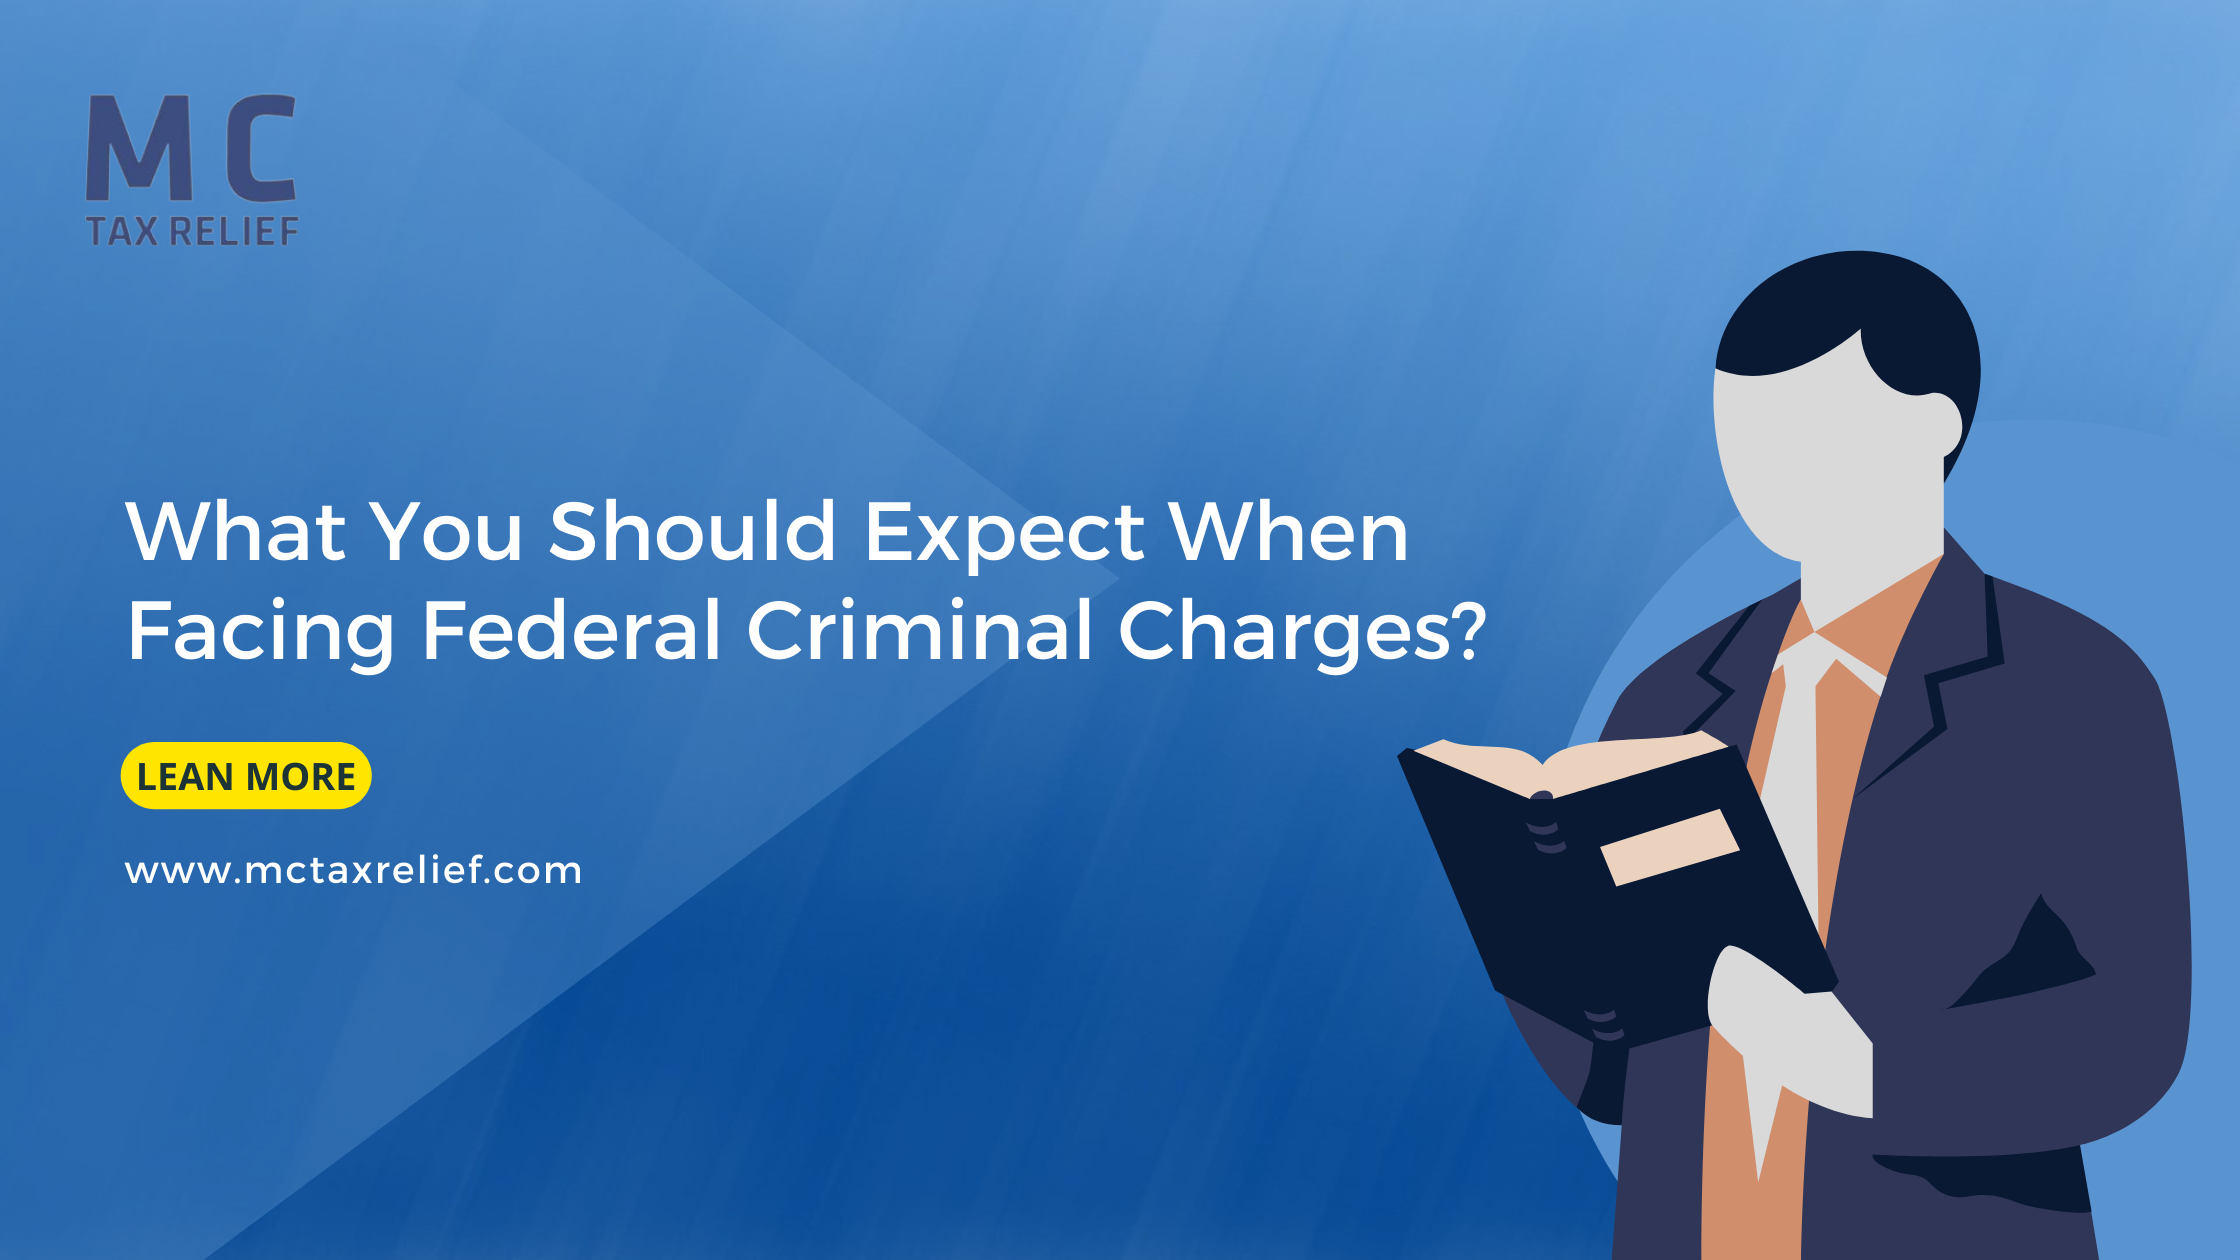 What You Should Expect When Facing Federal Criminal Charges